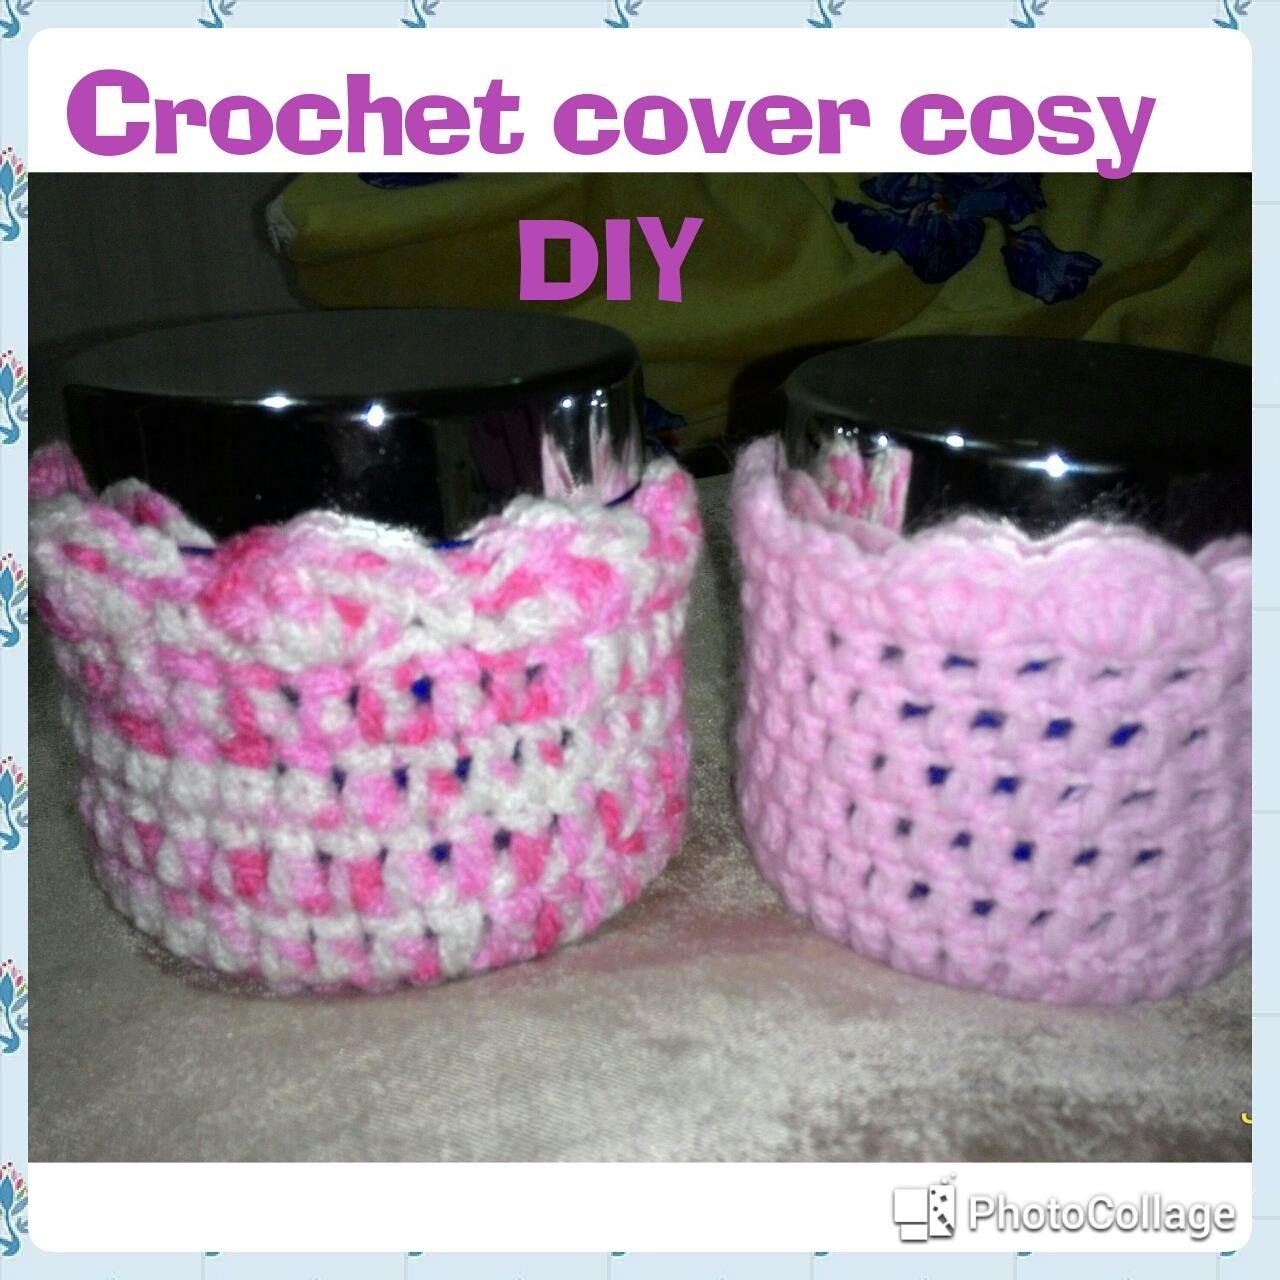 #DIY | HOW TO CROCHET A COVER COSY |EMPTY BOTTLE OR JAR | TAGLISH|